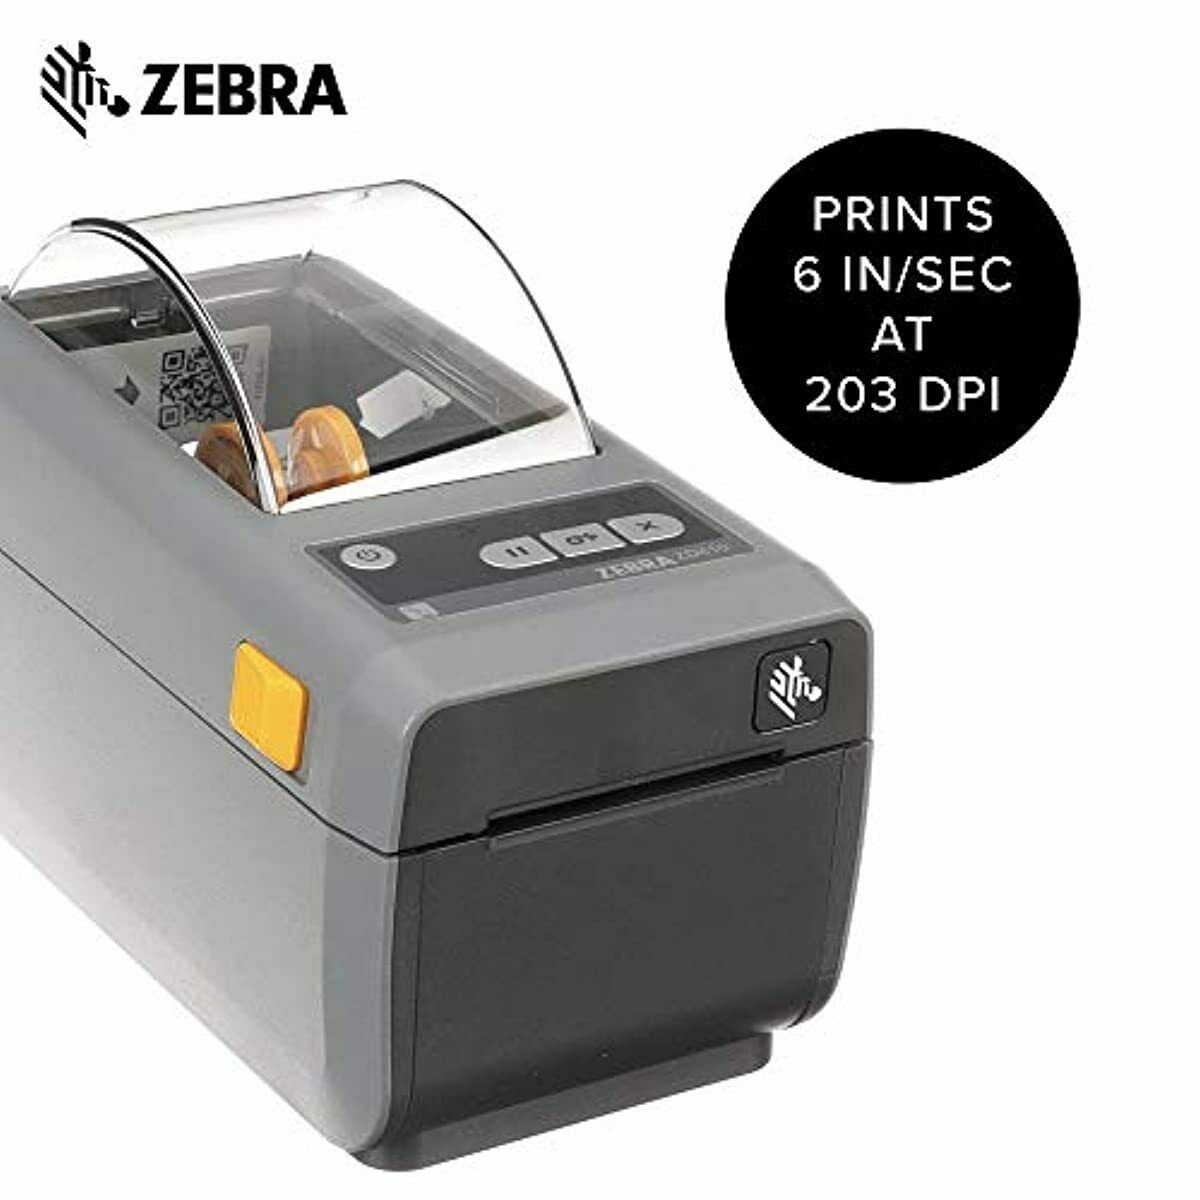 Zebra Zd410 Direct Thermal Desktop Printer For Labels Receipts Barcodes Tag Printers 9100